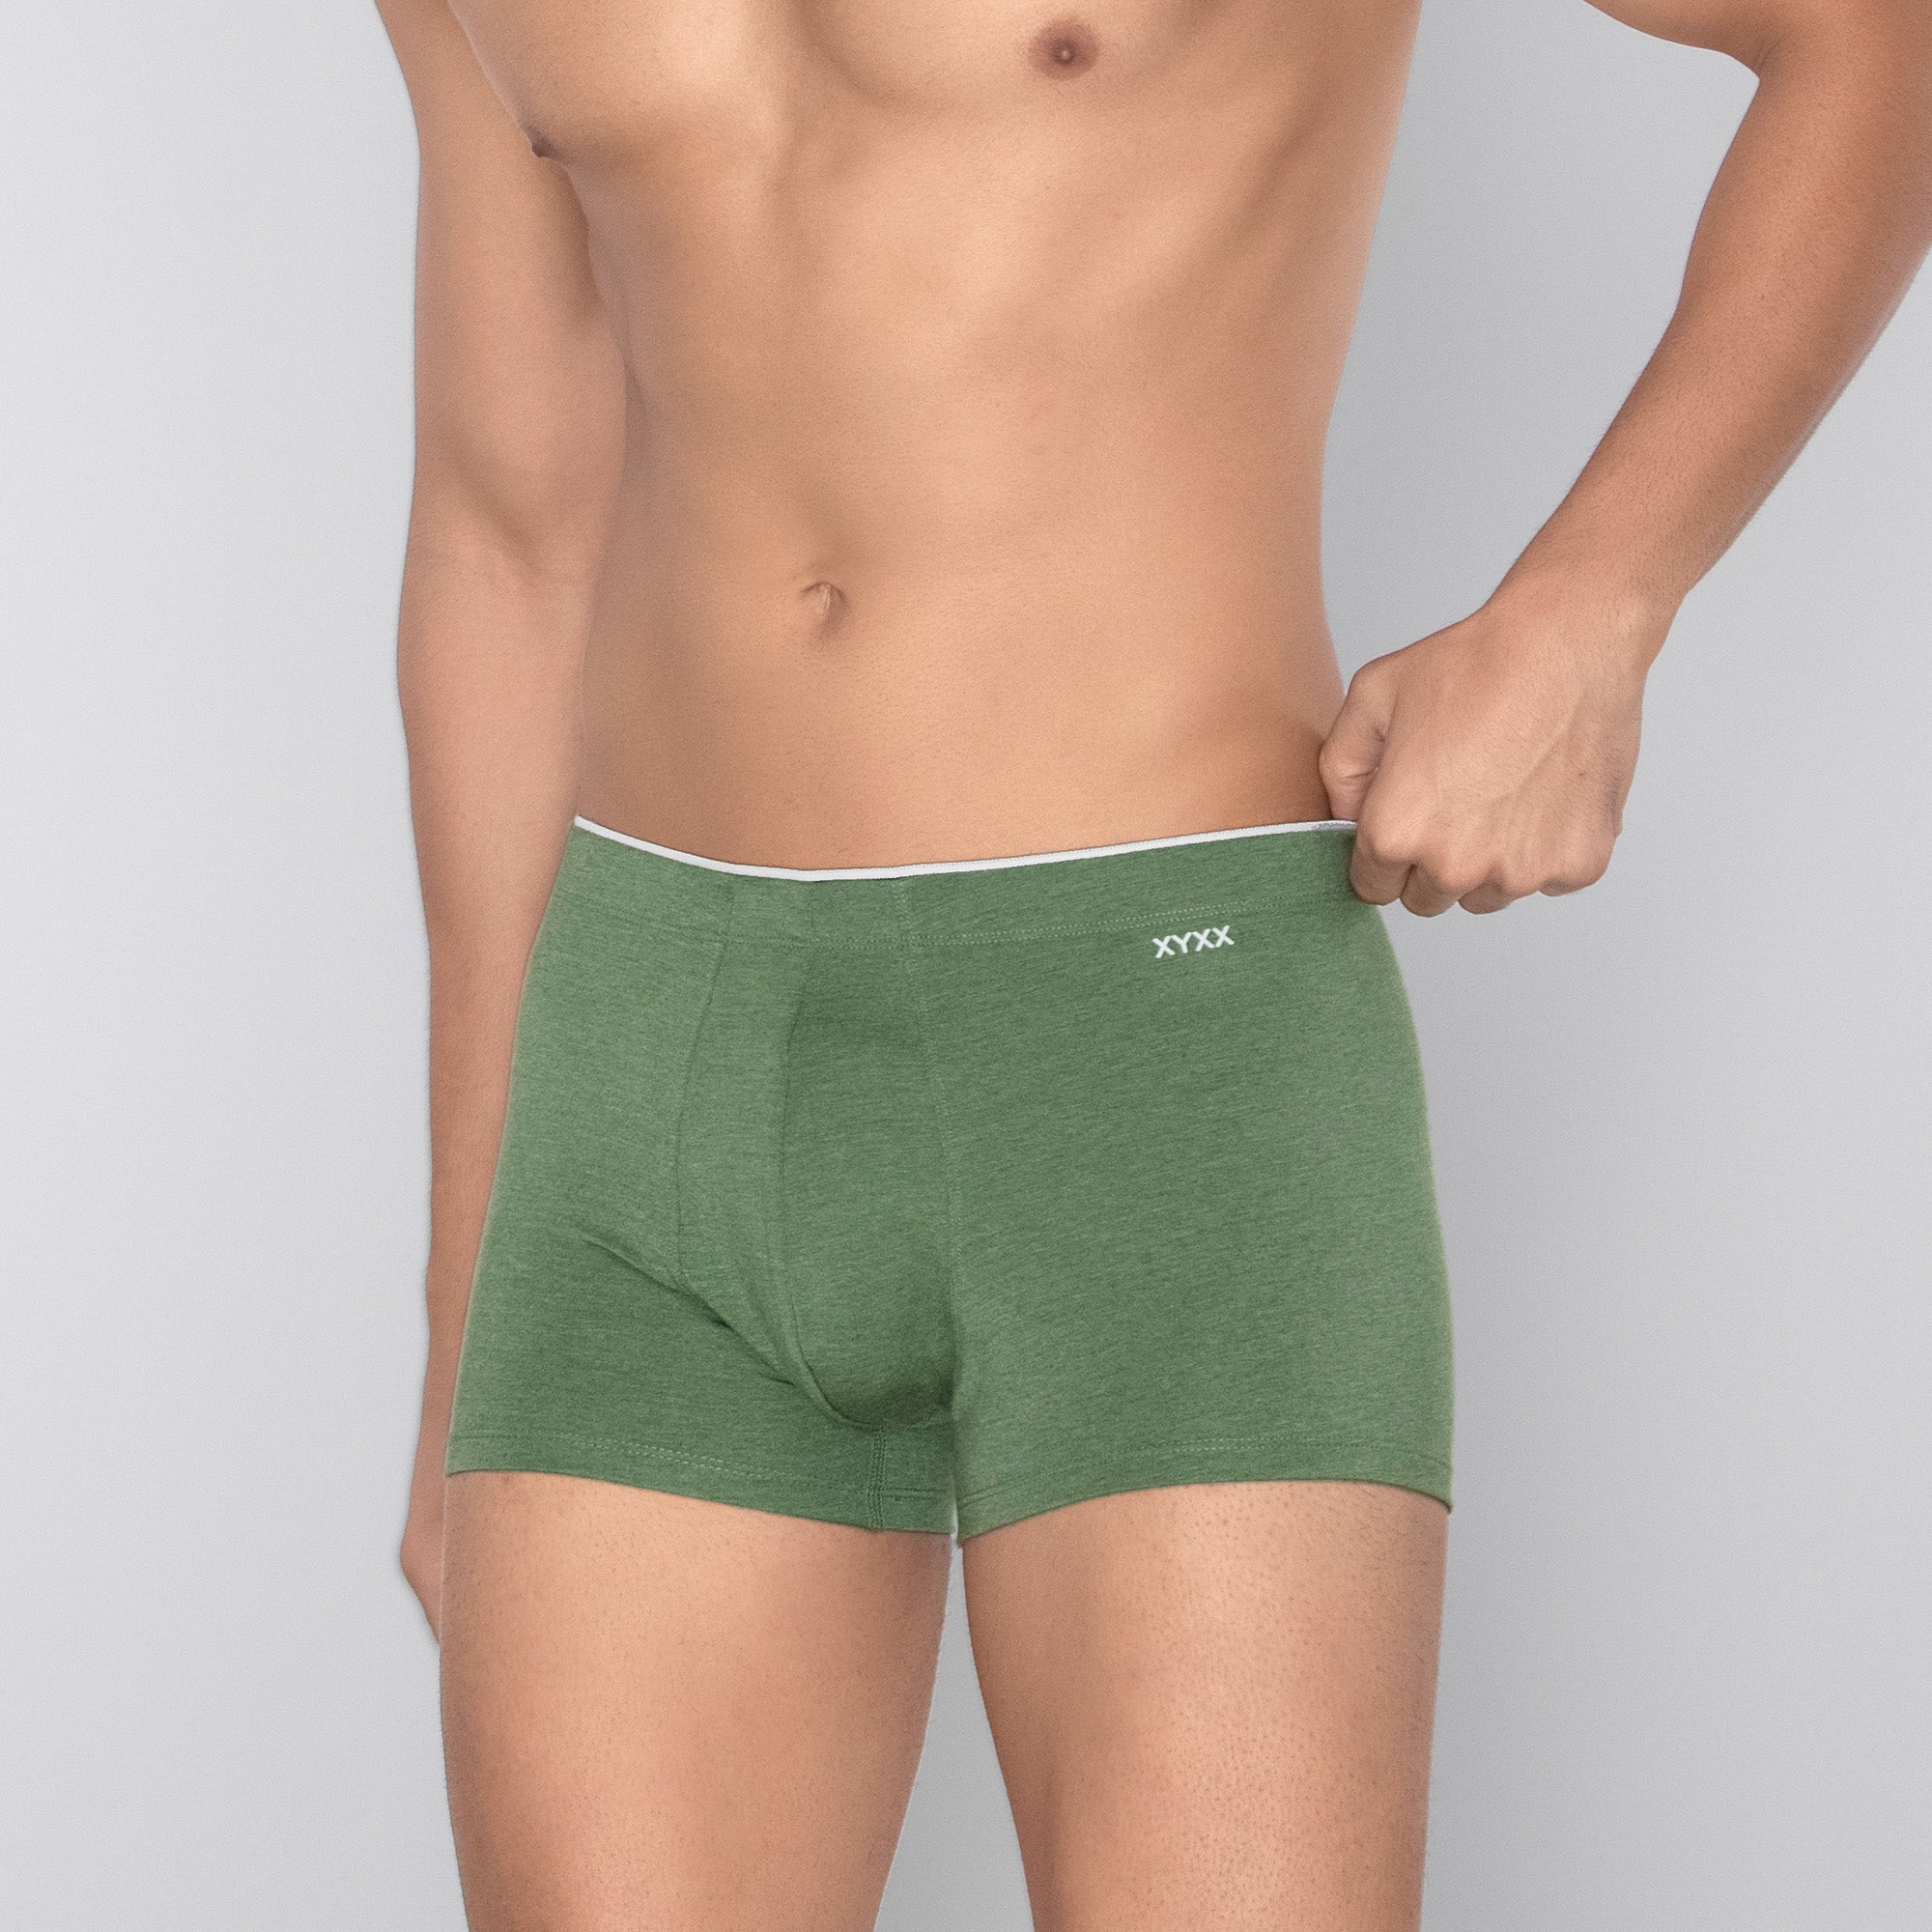 Uno Medley Modal Trunks Olive Green – XYXX Apparels